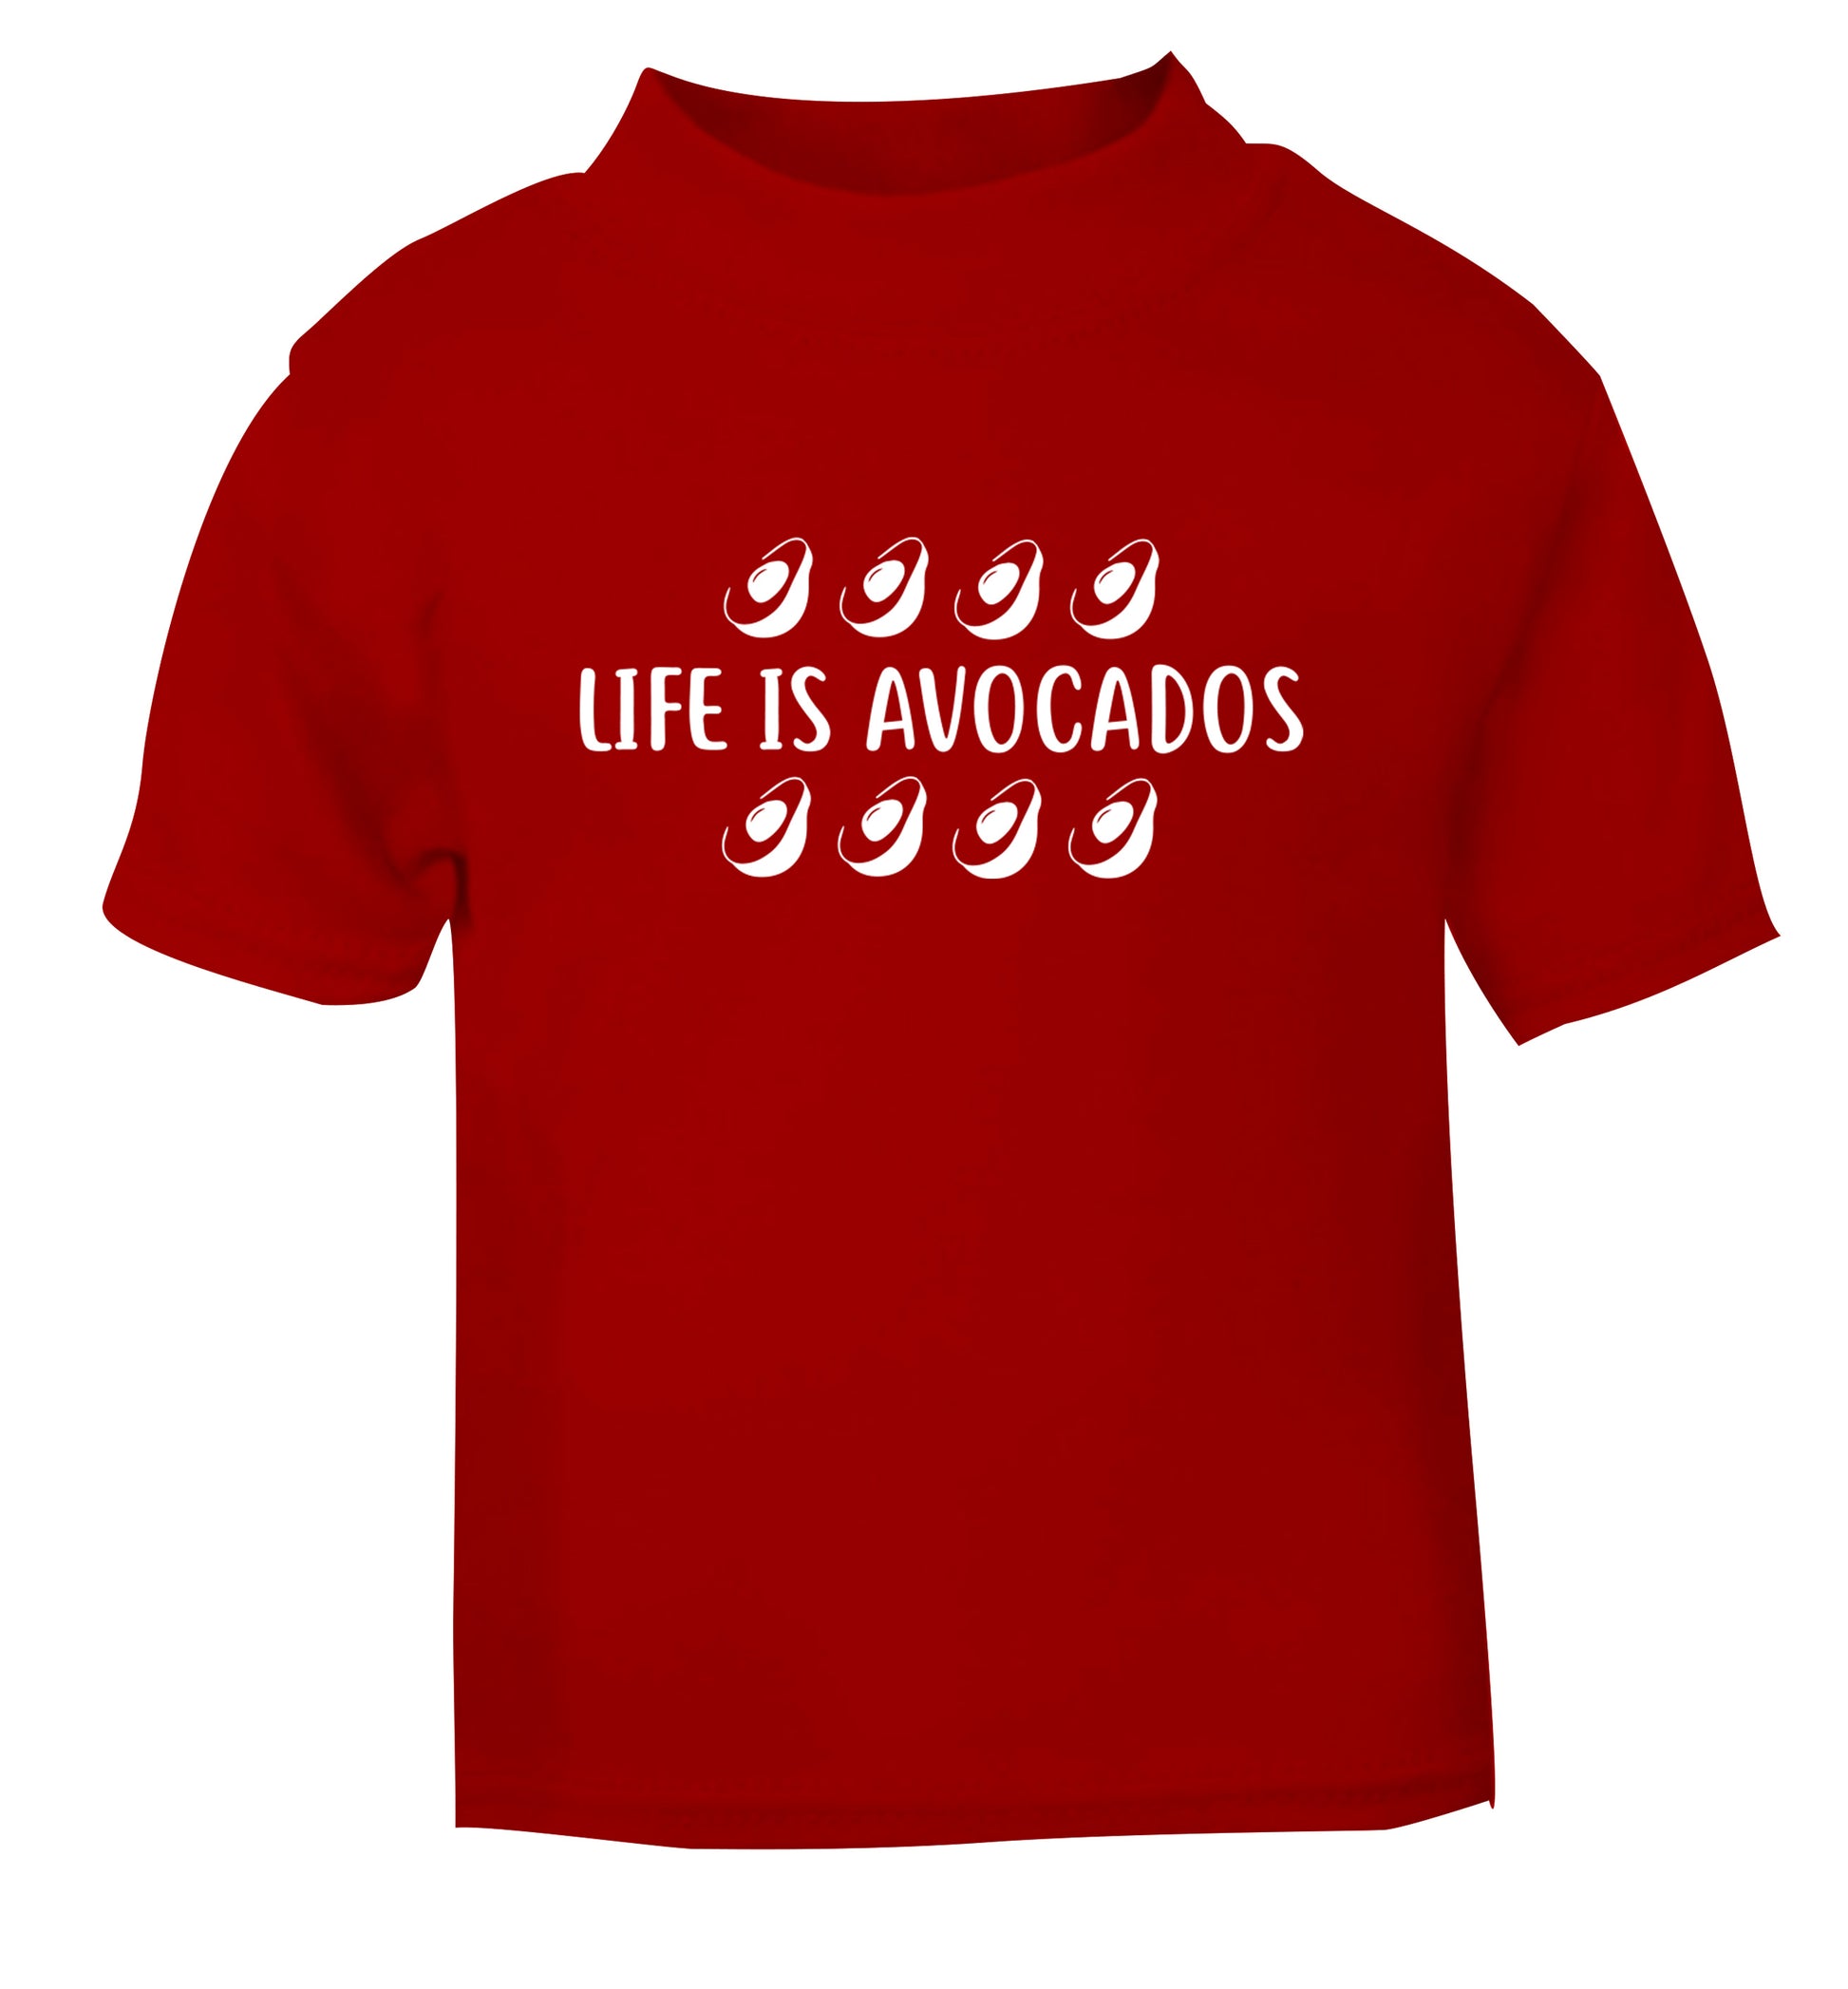 Life is avocados red Baby Toddler Tshirt 2 Years